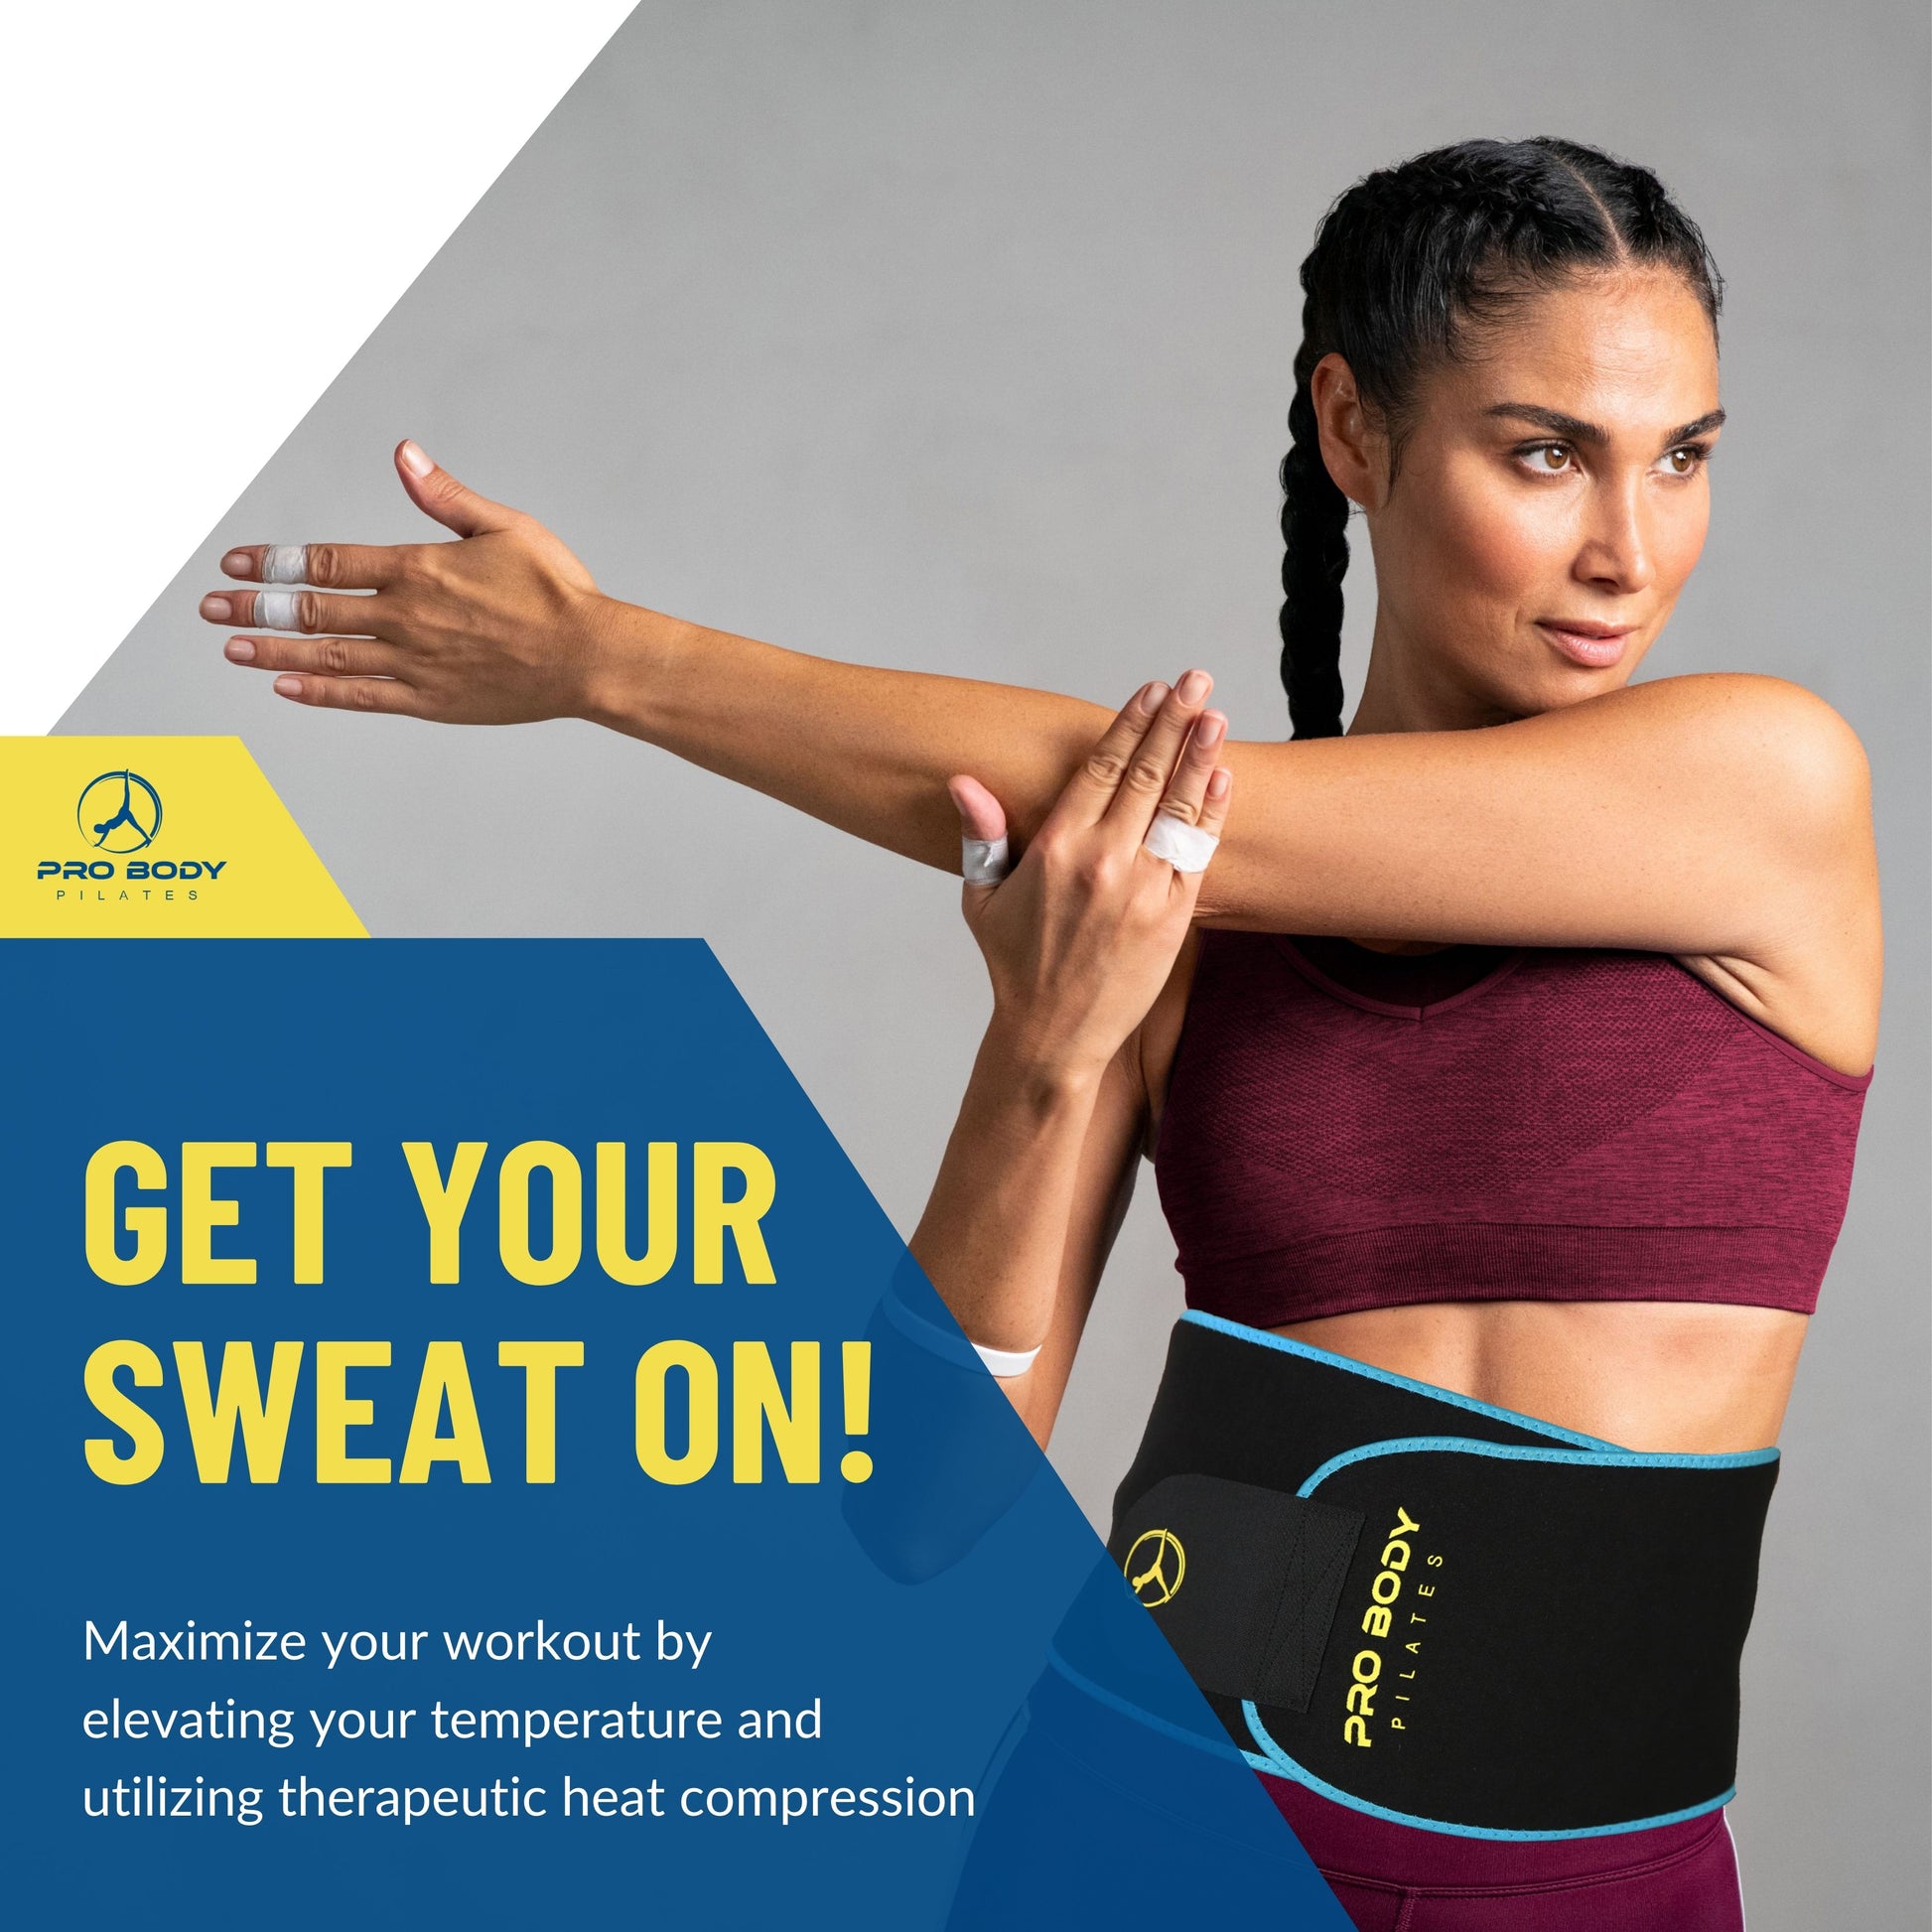 The Waist Trimmer Belt Rated #1 On The Internet – TNT Pro Series